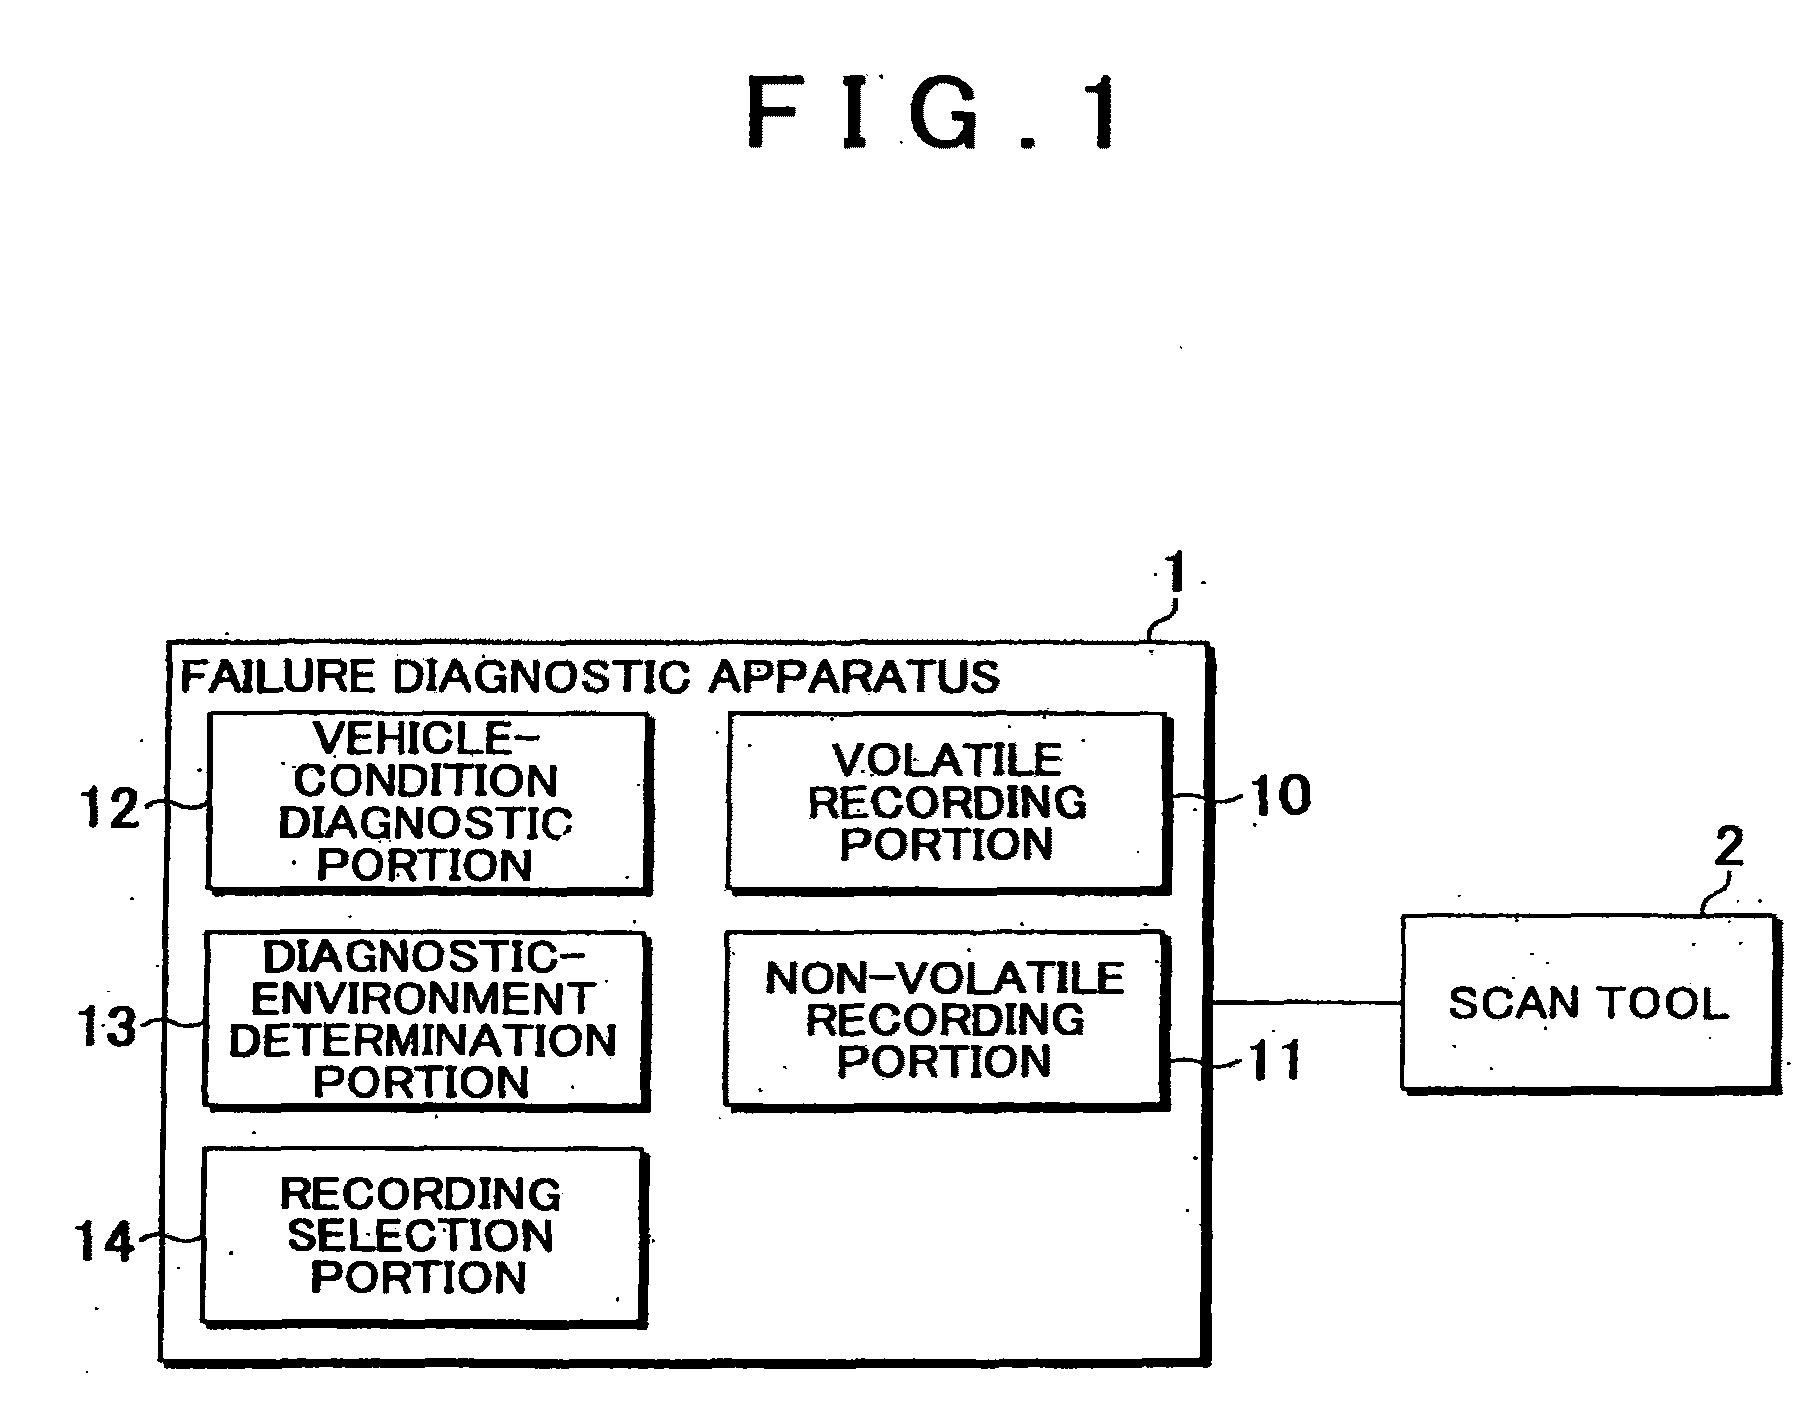 Failure diagnostic apparatus and method of strong of storing failure information